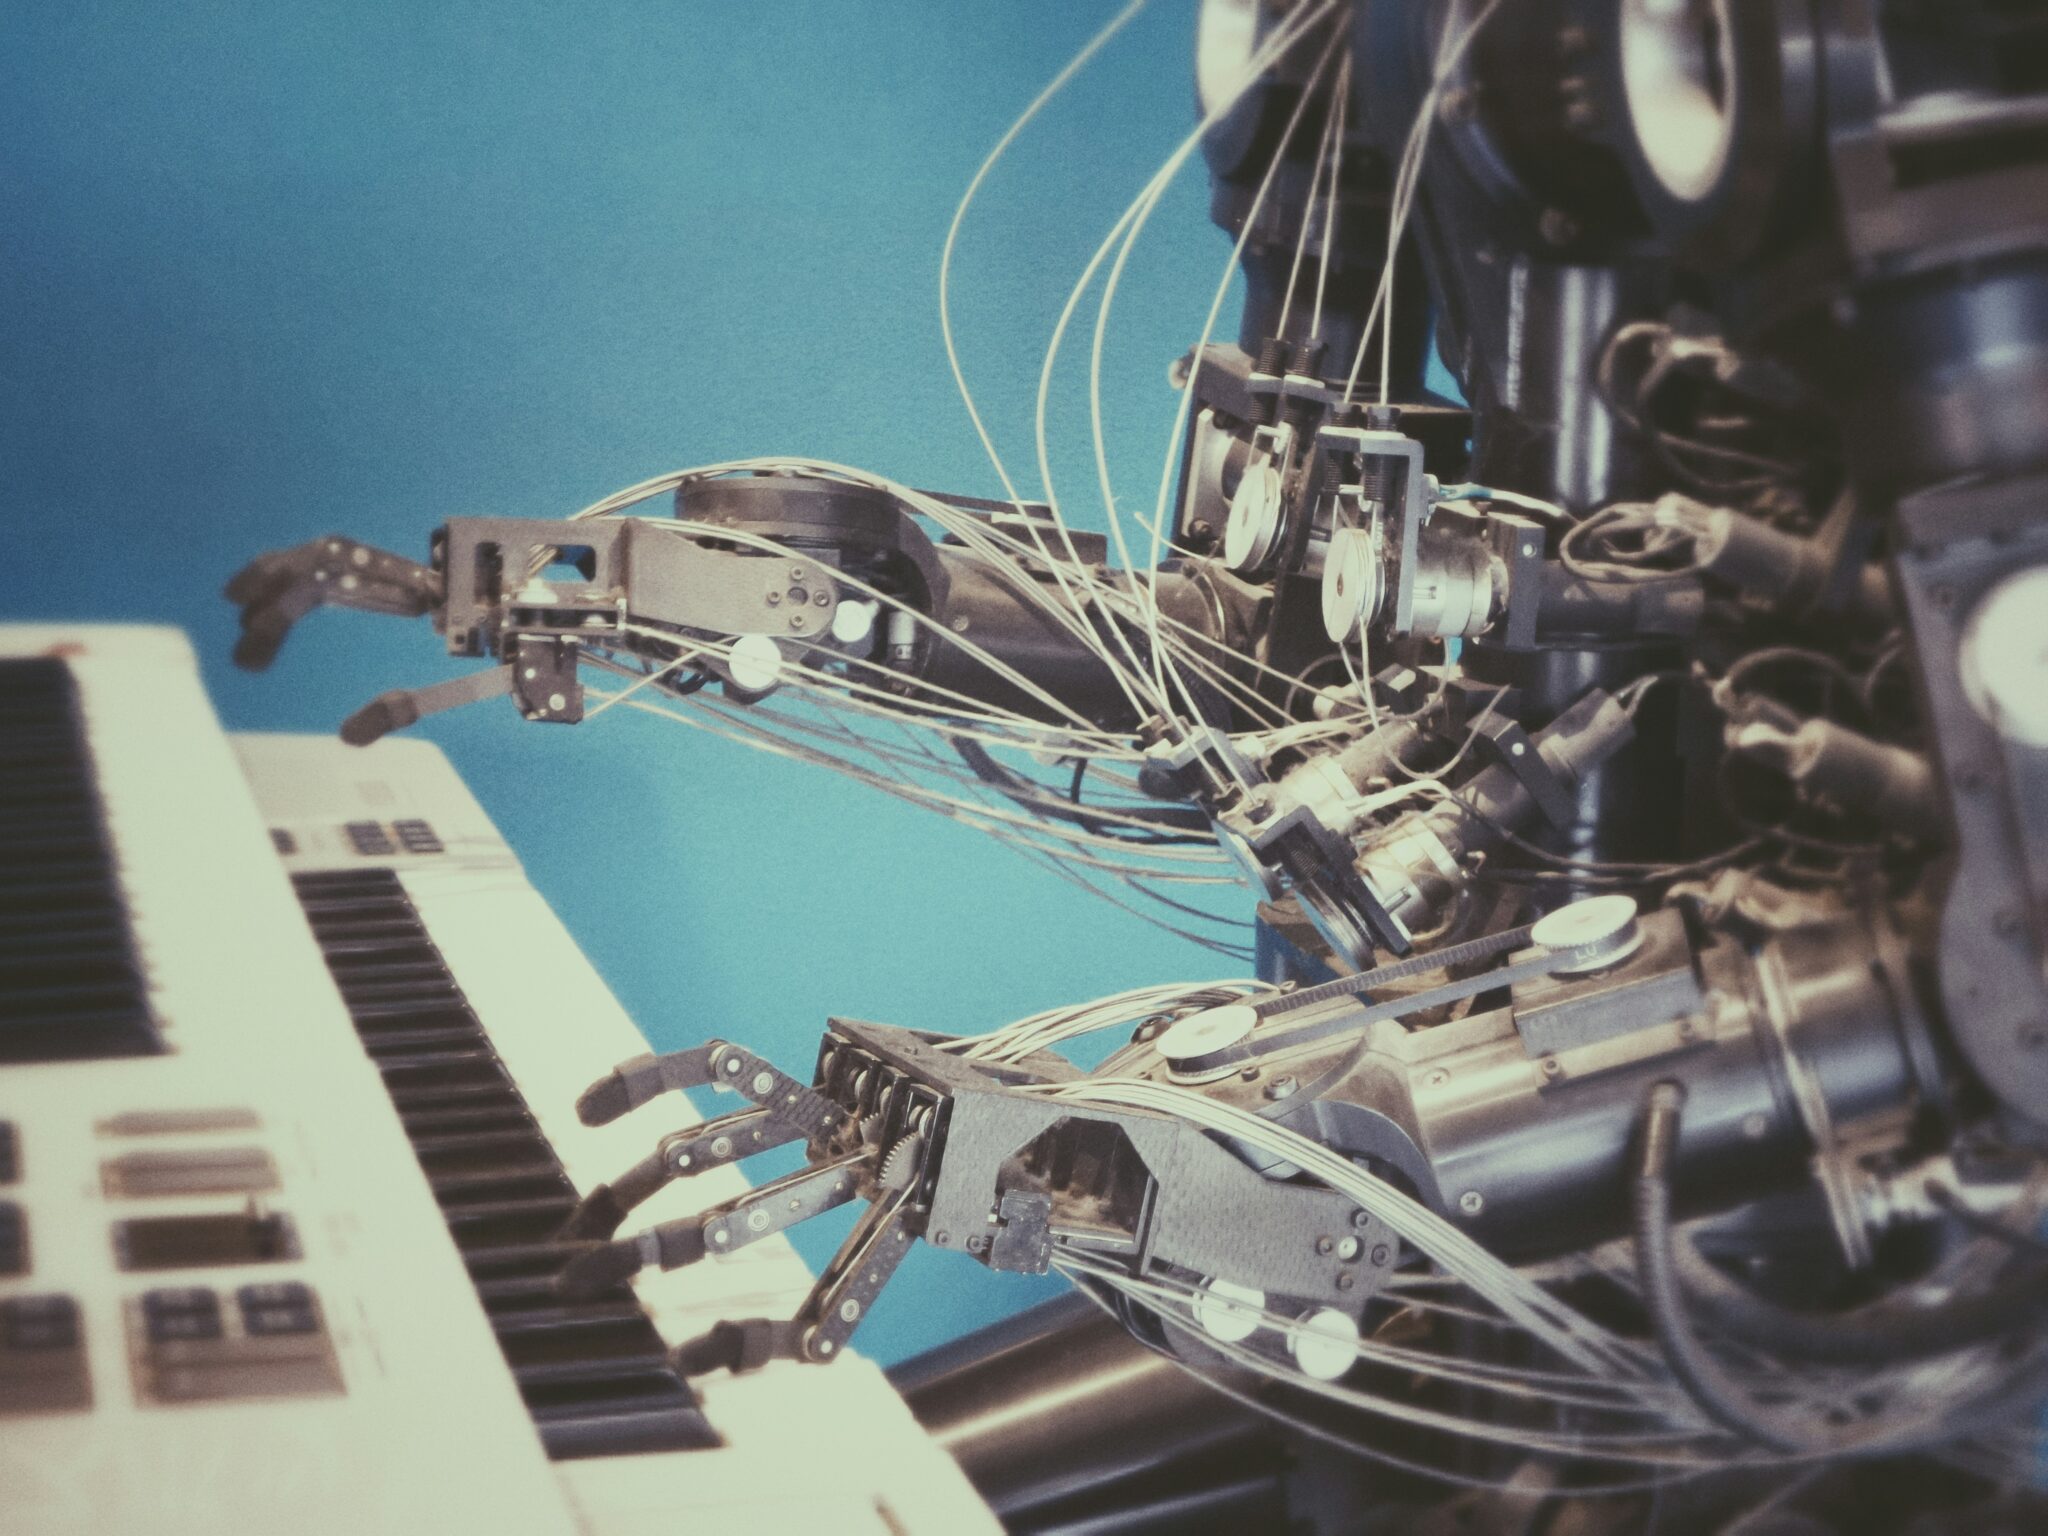 A metal robot made up of lots of joined, angular parts, sitting at a piano to play it.